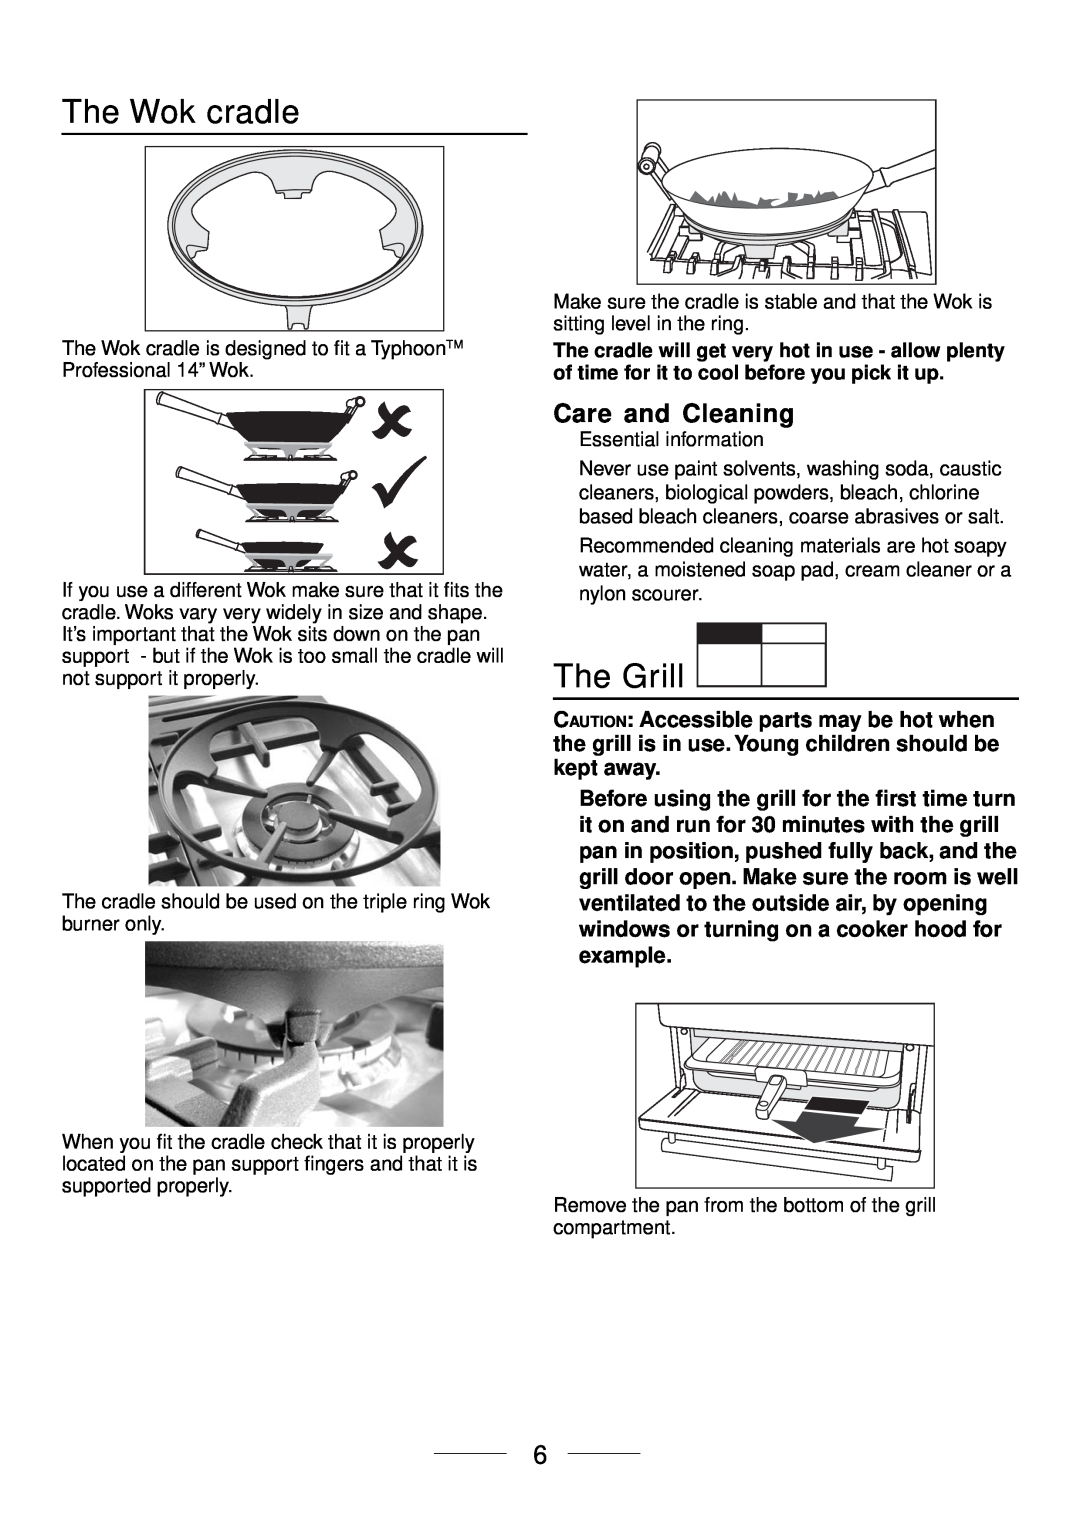 Maytag 110 installation instructions The Wok cradle, The Grill, Care and Cleaning 